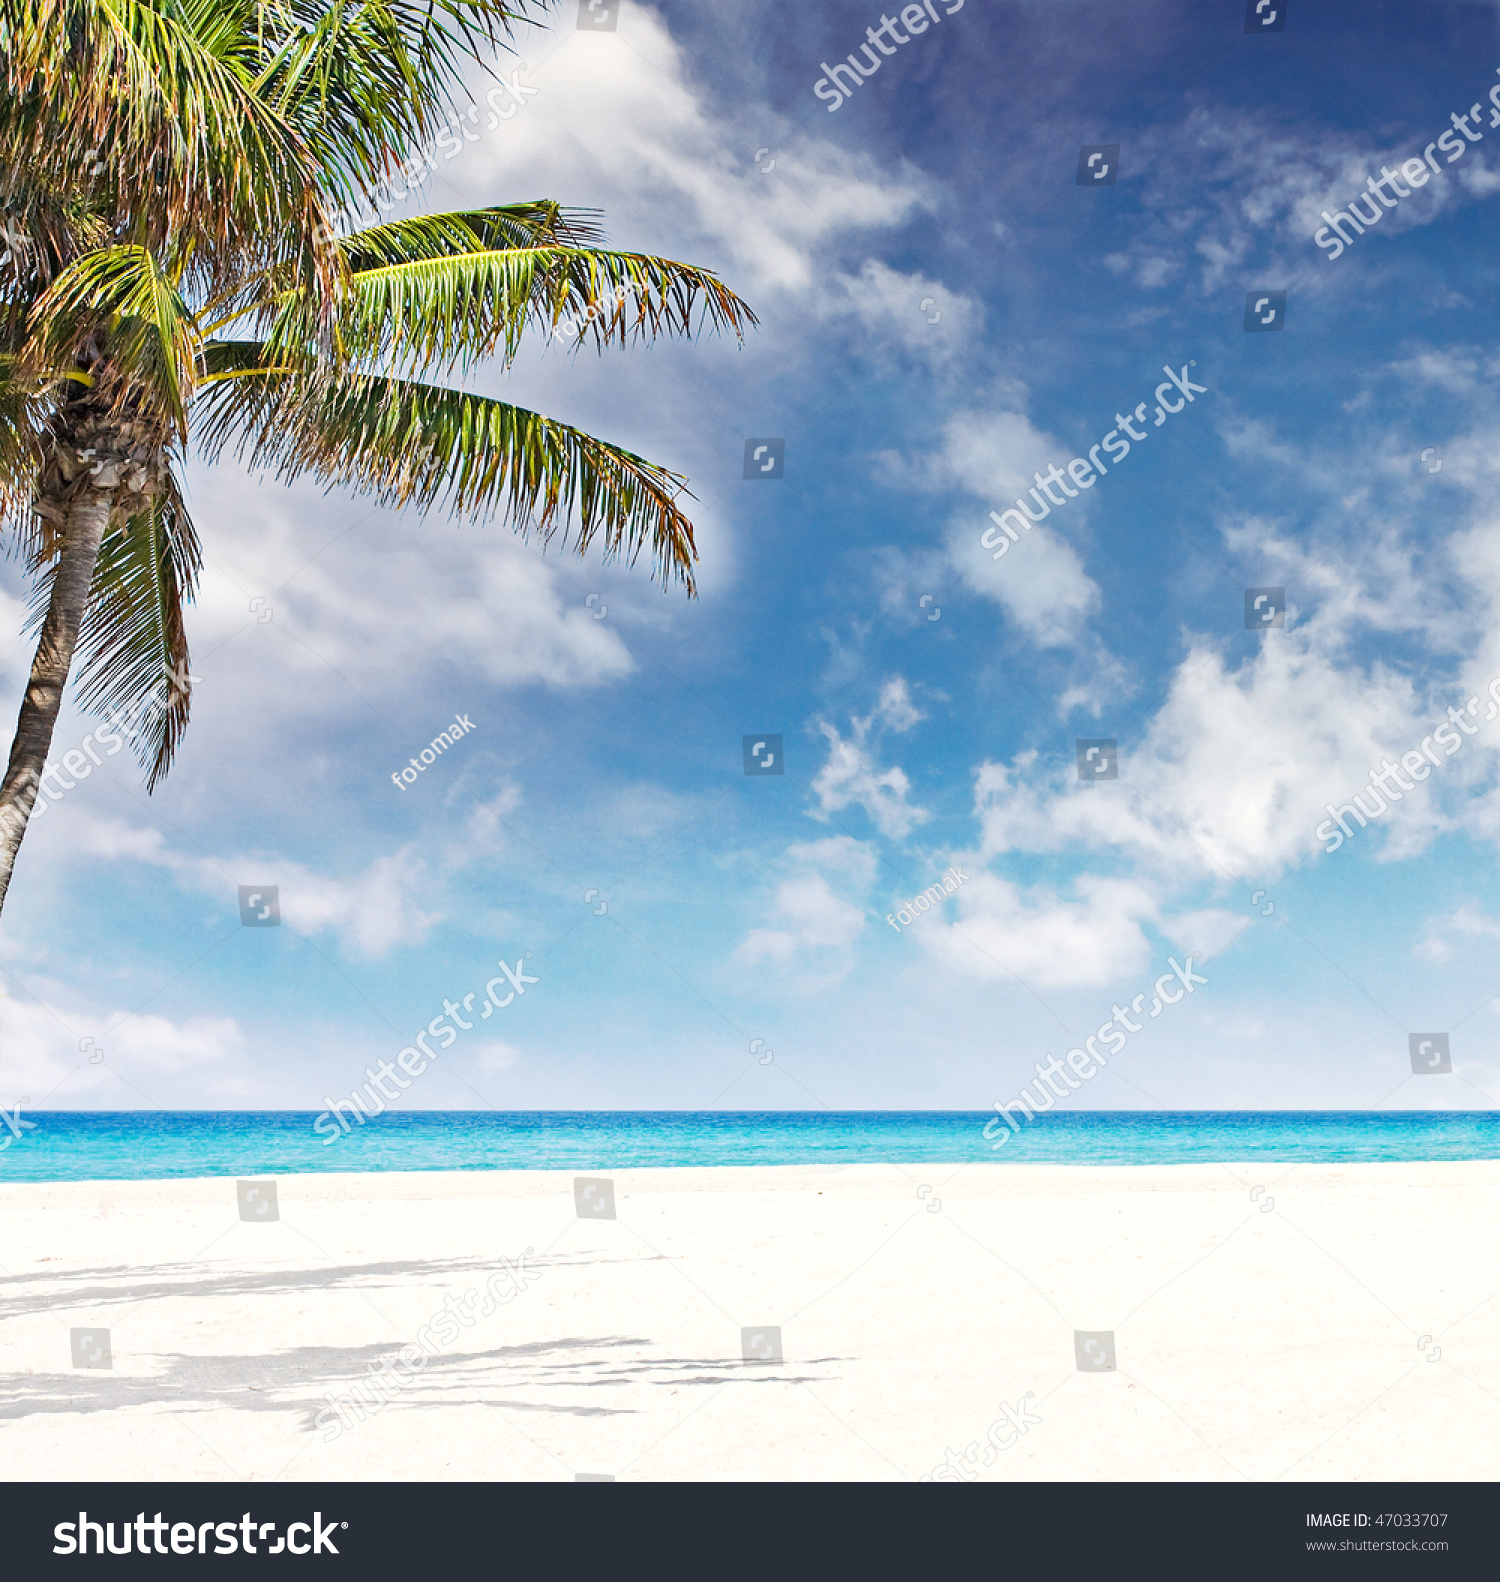 Tropical Beach In Miami Florida With Palm Trees Blue Sky, White Sand ...